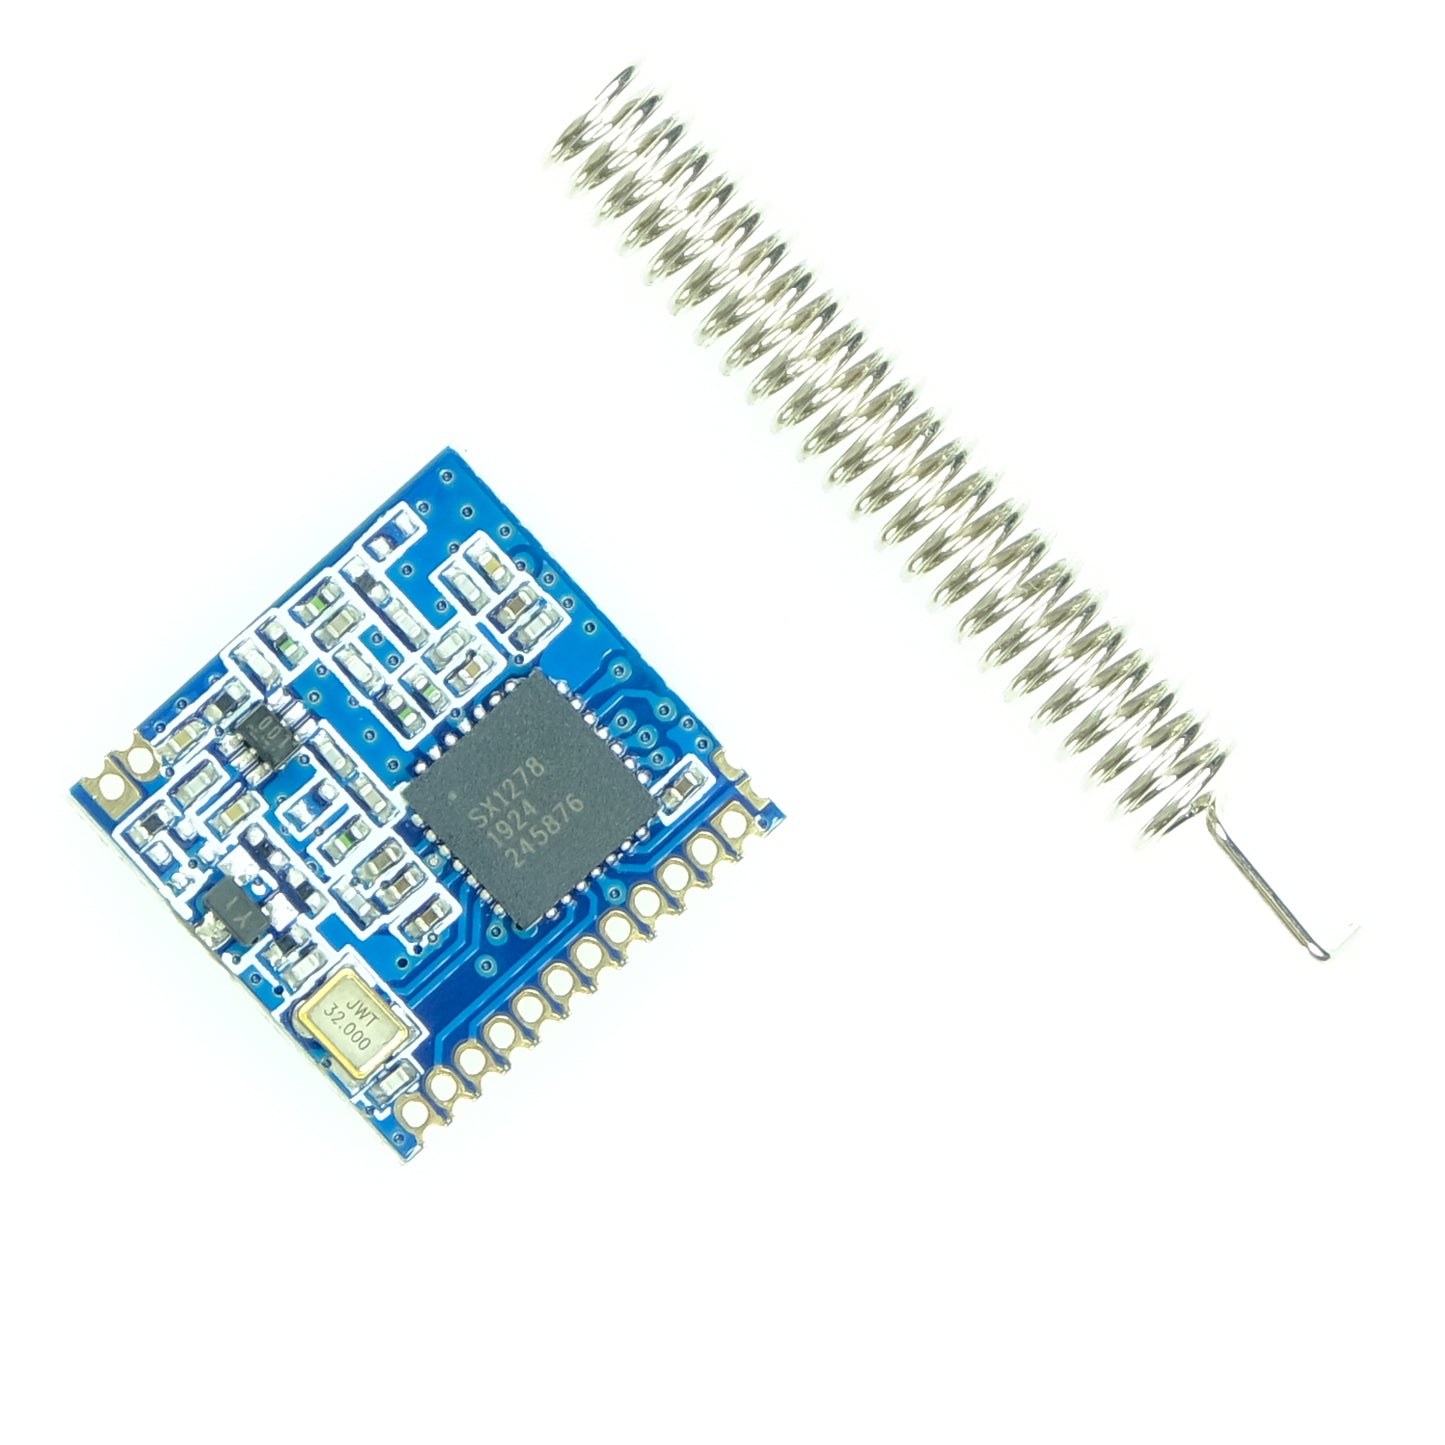 433MHz SX1276 LoRa Breakout Board with Antenna